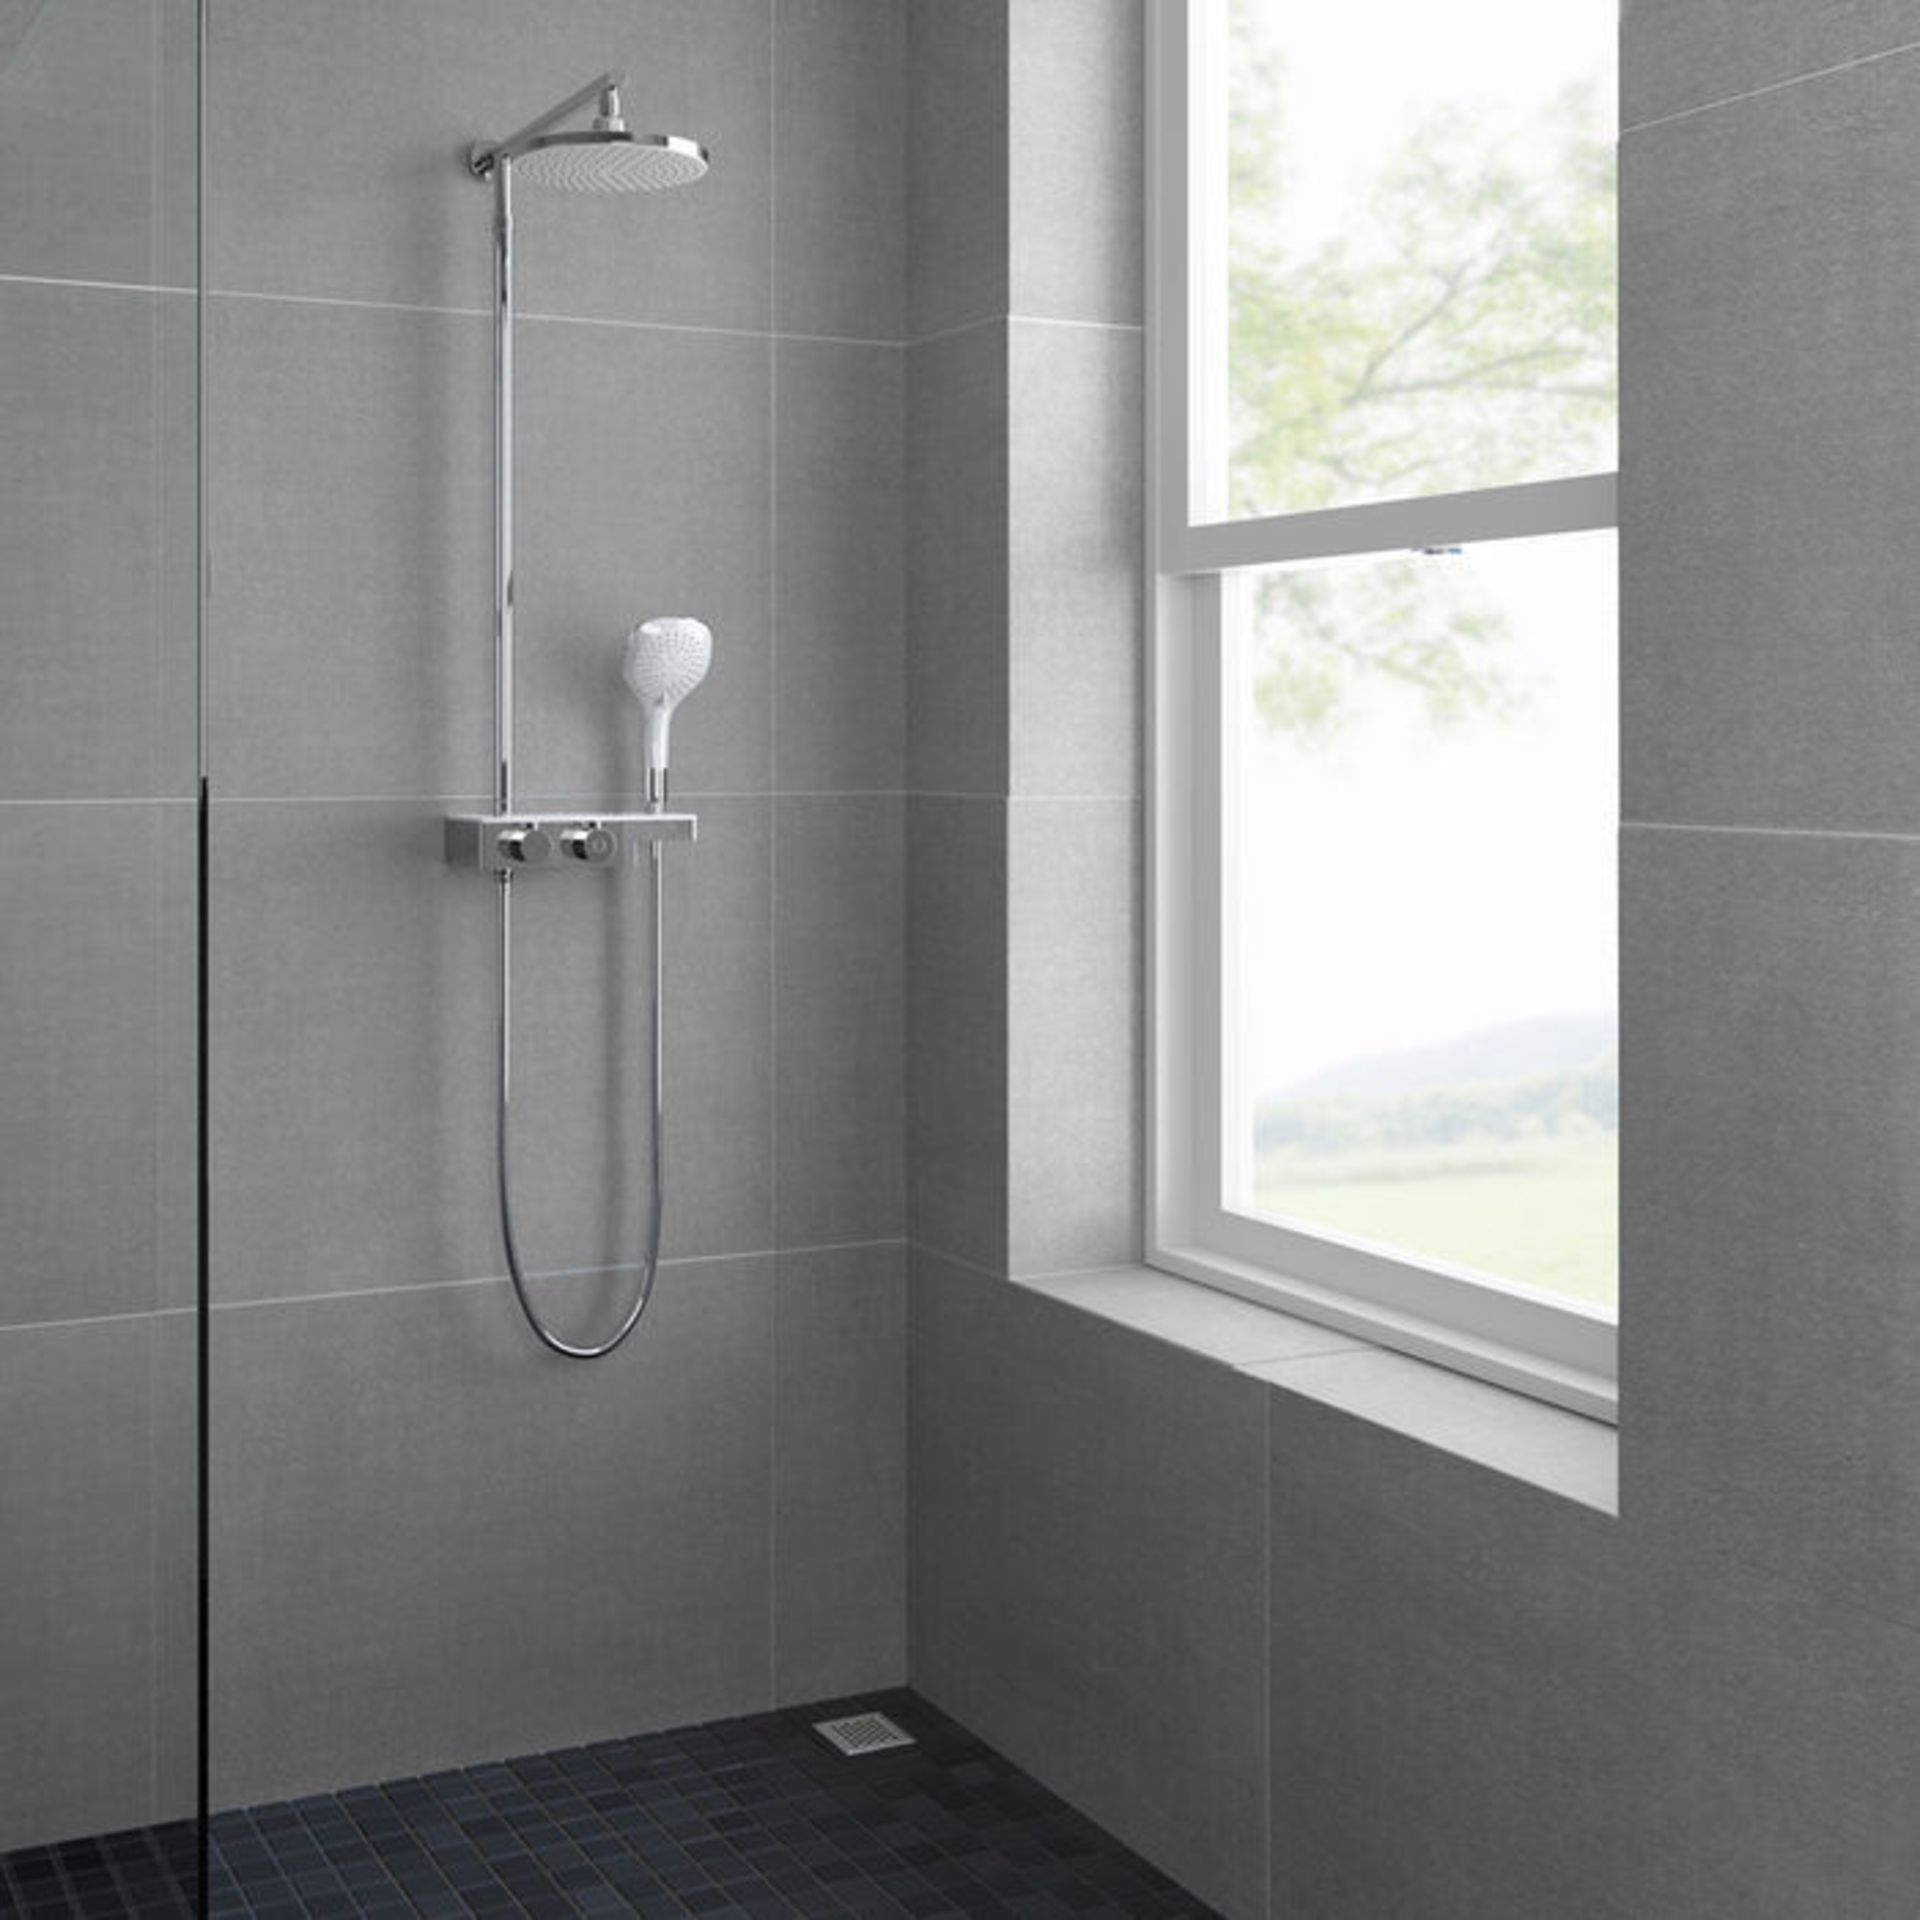 (MW41) Round Exposed Thermostatic Mixer Shower Kit Medium Head & Shelf. RRP £349.99. Cool to touch - Bild 2 aus 6